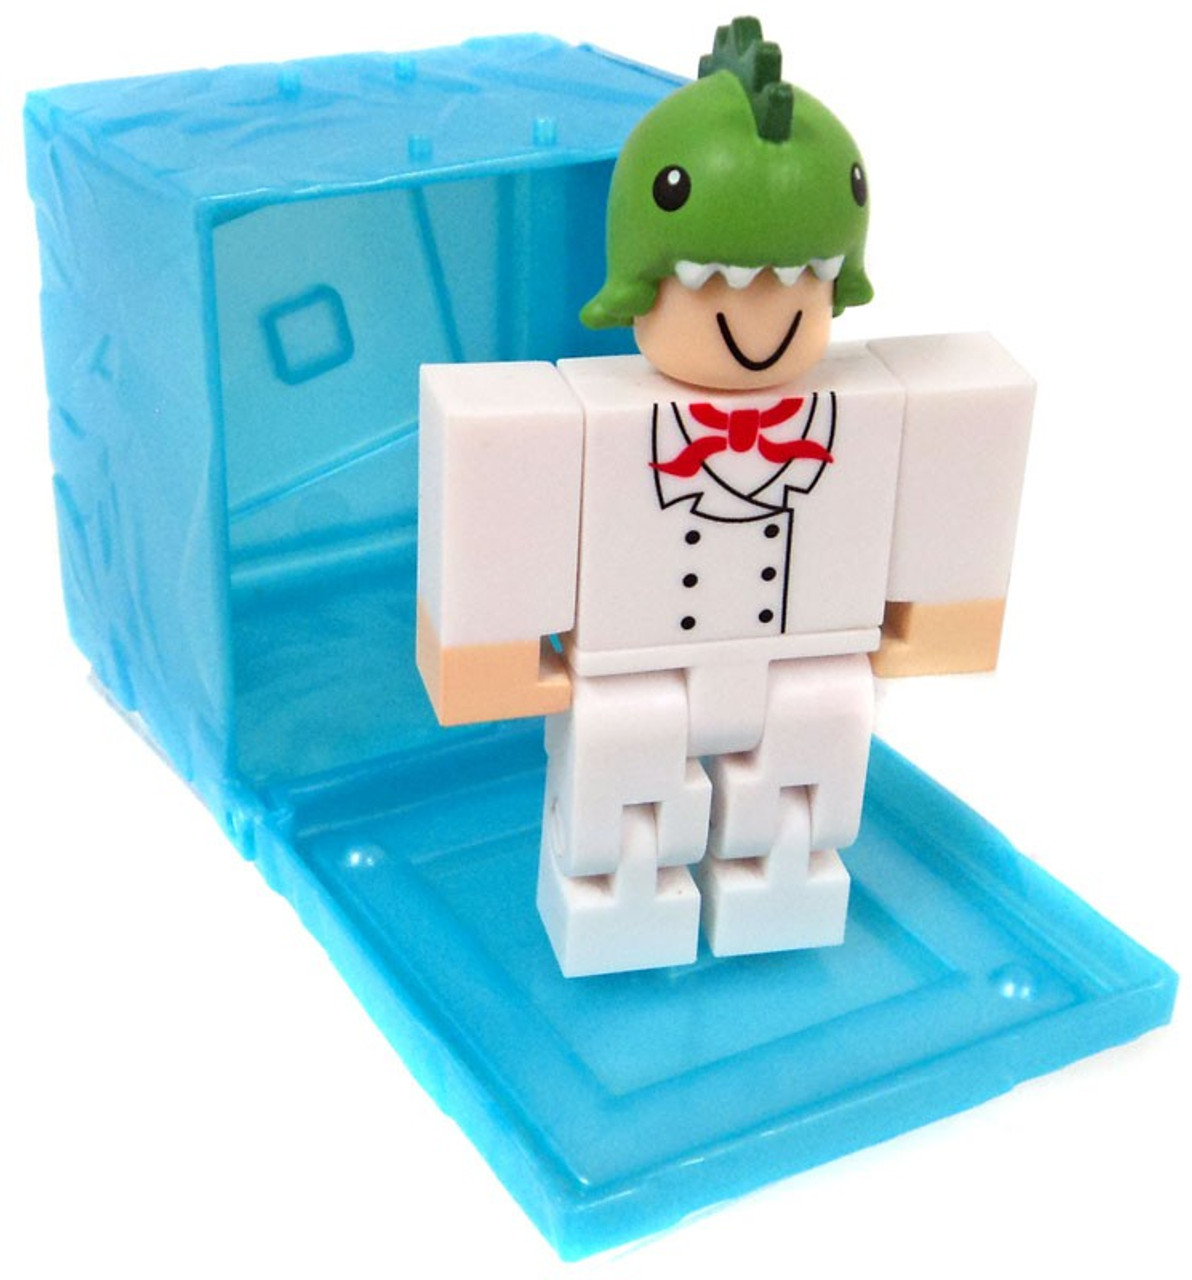 Roblox Red Series 3 Theme Park Tycoon Dino Vender 3 Mini Figure Blue Cube With Online Code Loose Jazwares Toywiz - roblox dinosaur simulator may 2020 codes the eagle eye